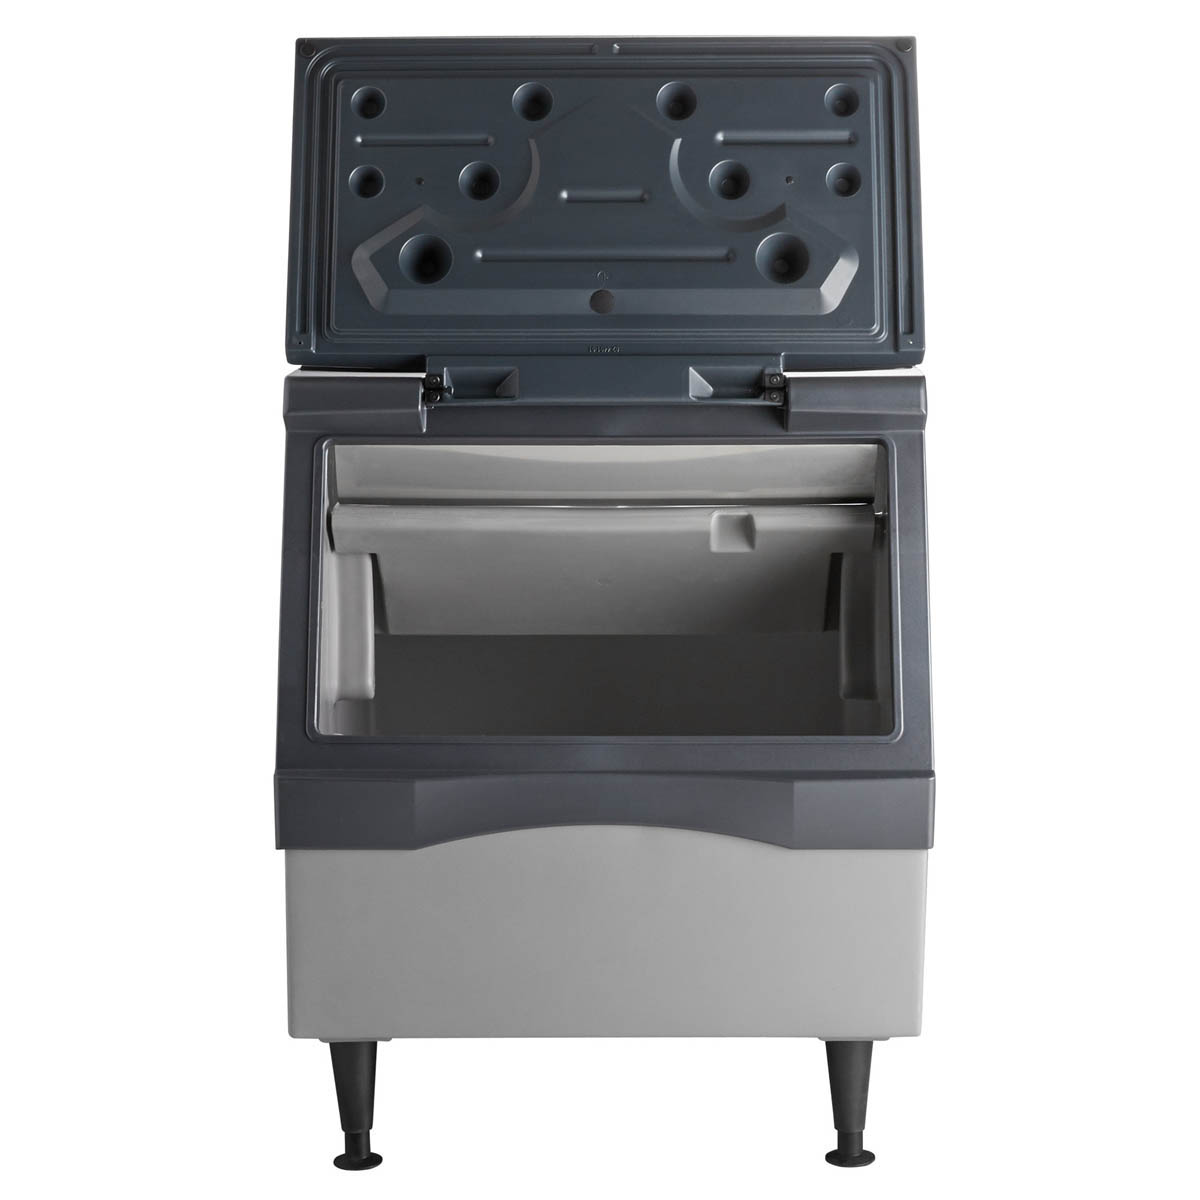 Scotsman B330P Is An Effective Way To Keep Your Ice Supply Cool and Available, Chef's Deal